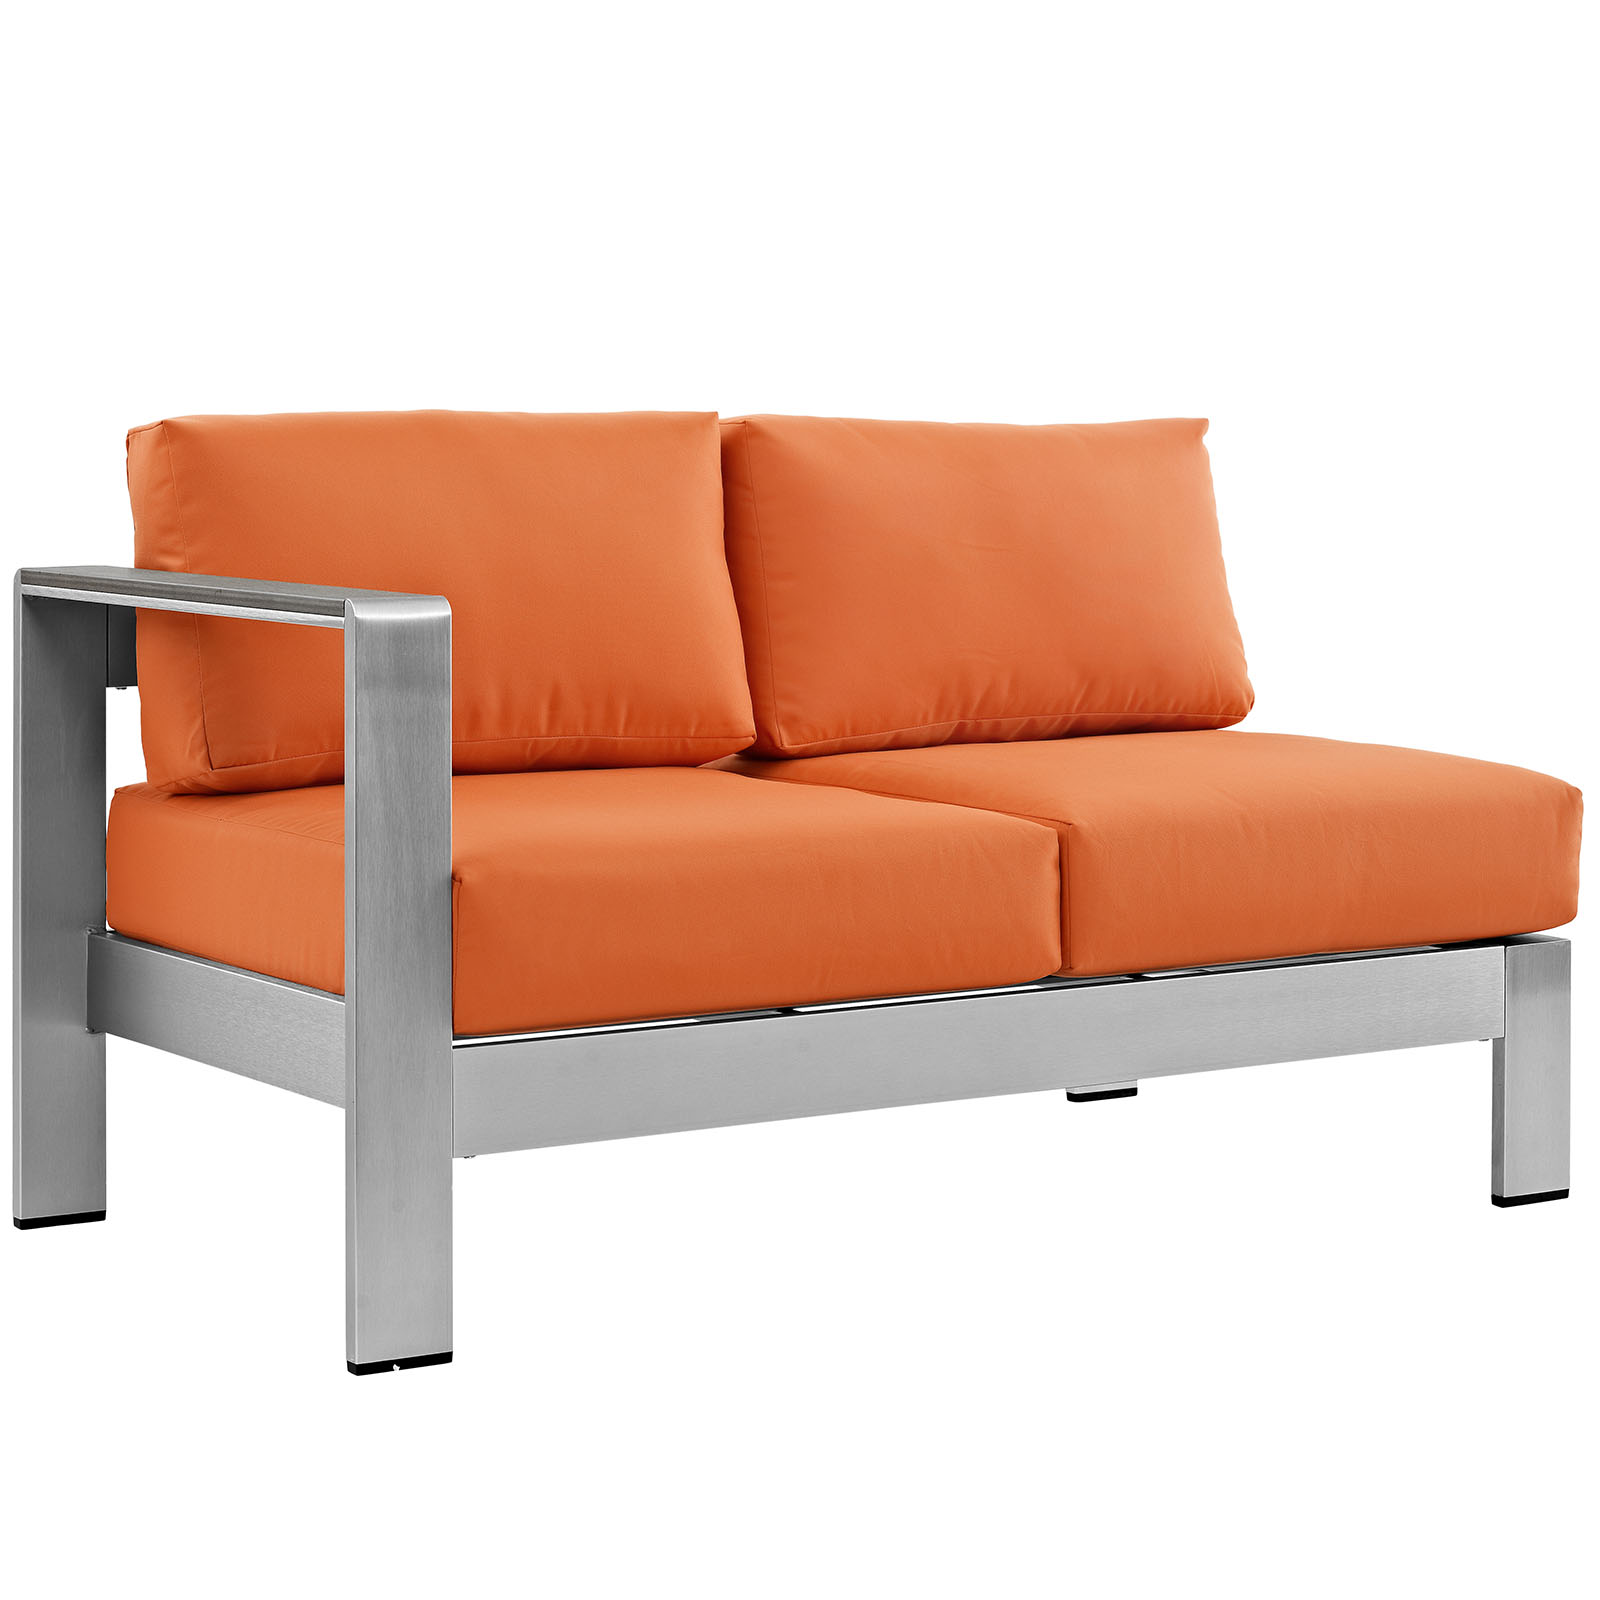 Modway Shore 6 Piece Outdoor Patio Aluminum Sectional Sofa Set in Silver Orange - image 3 of 8